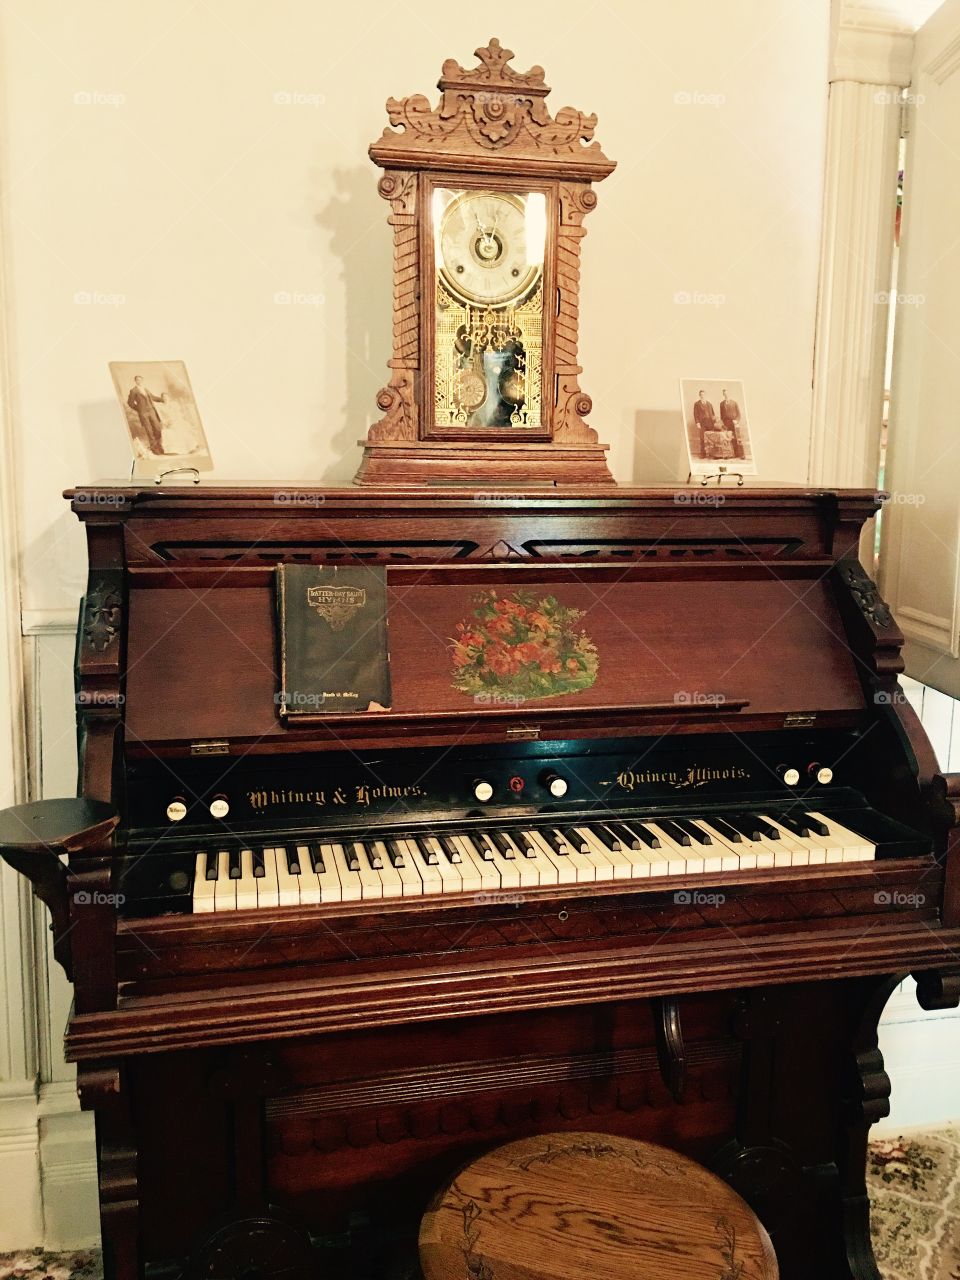 Antique Piano. Wooden. Old. Music. Keys. Clock. Picture frames. Beautiful antique. Historical home.